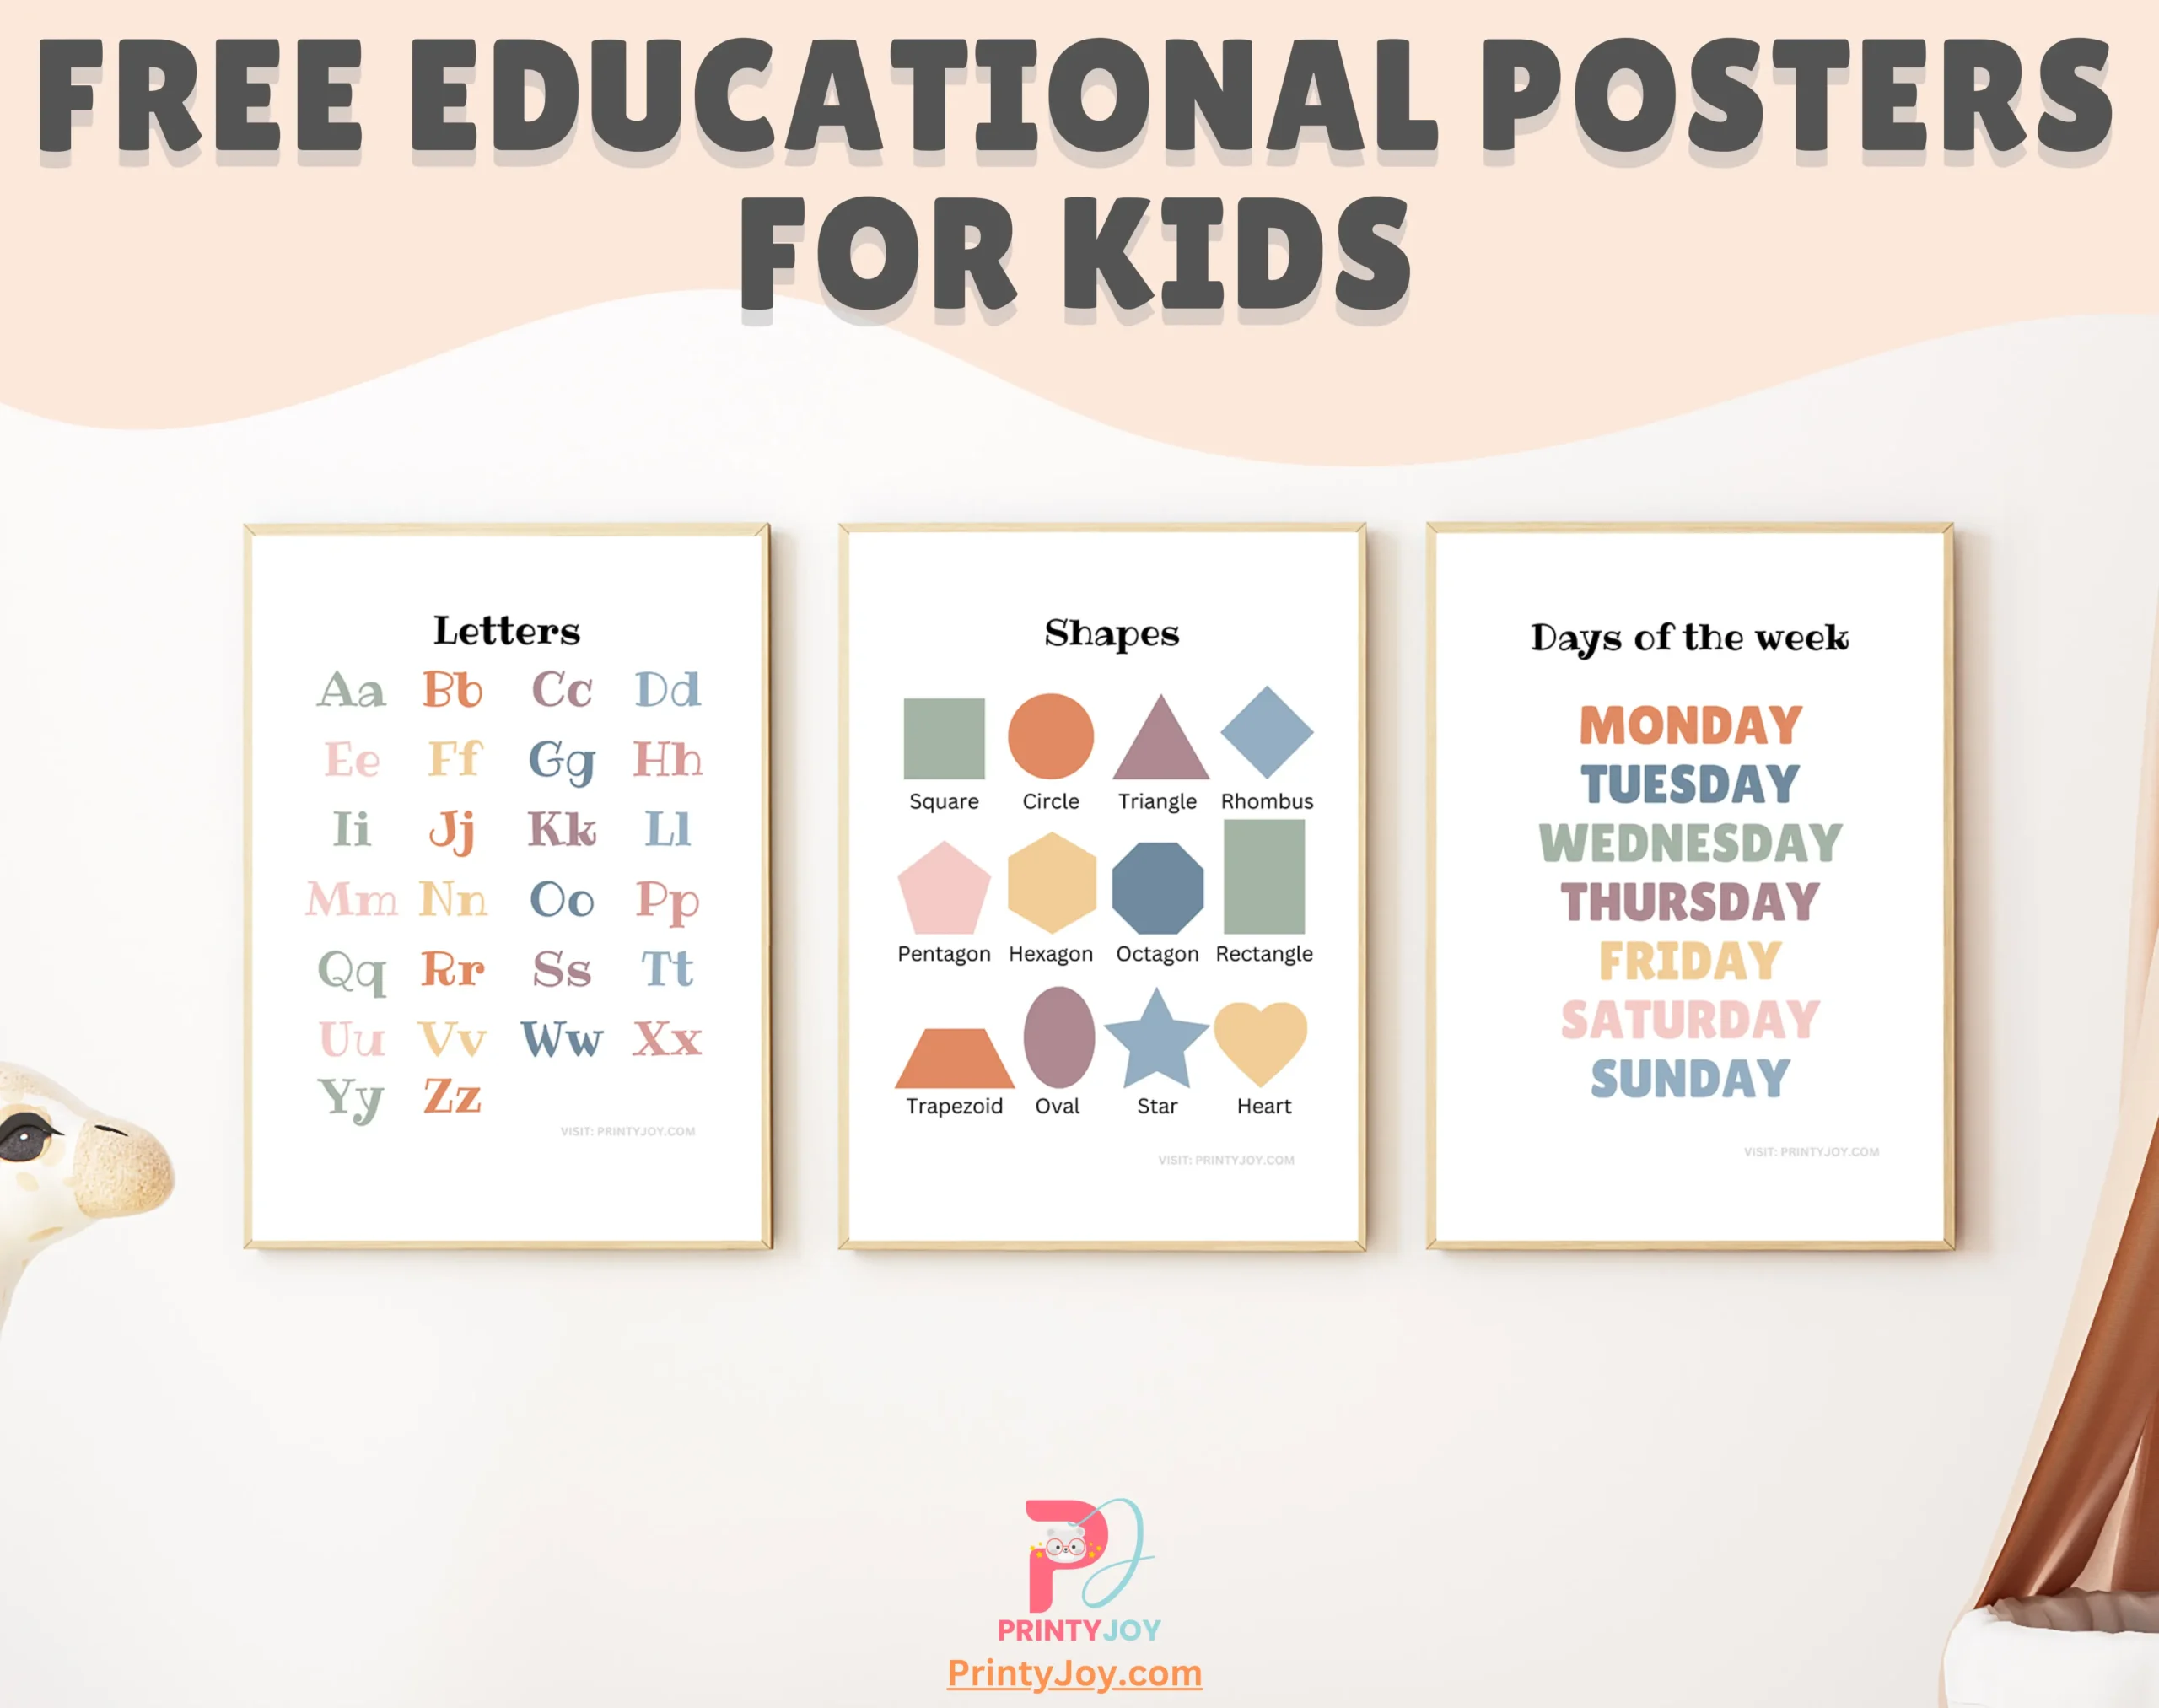 Free Educational Posters for Kids